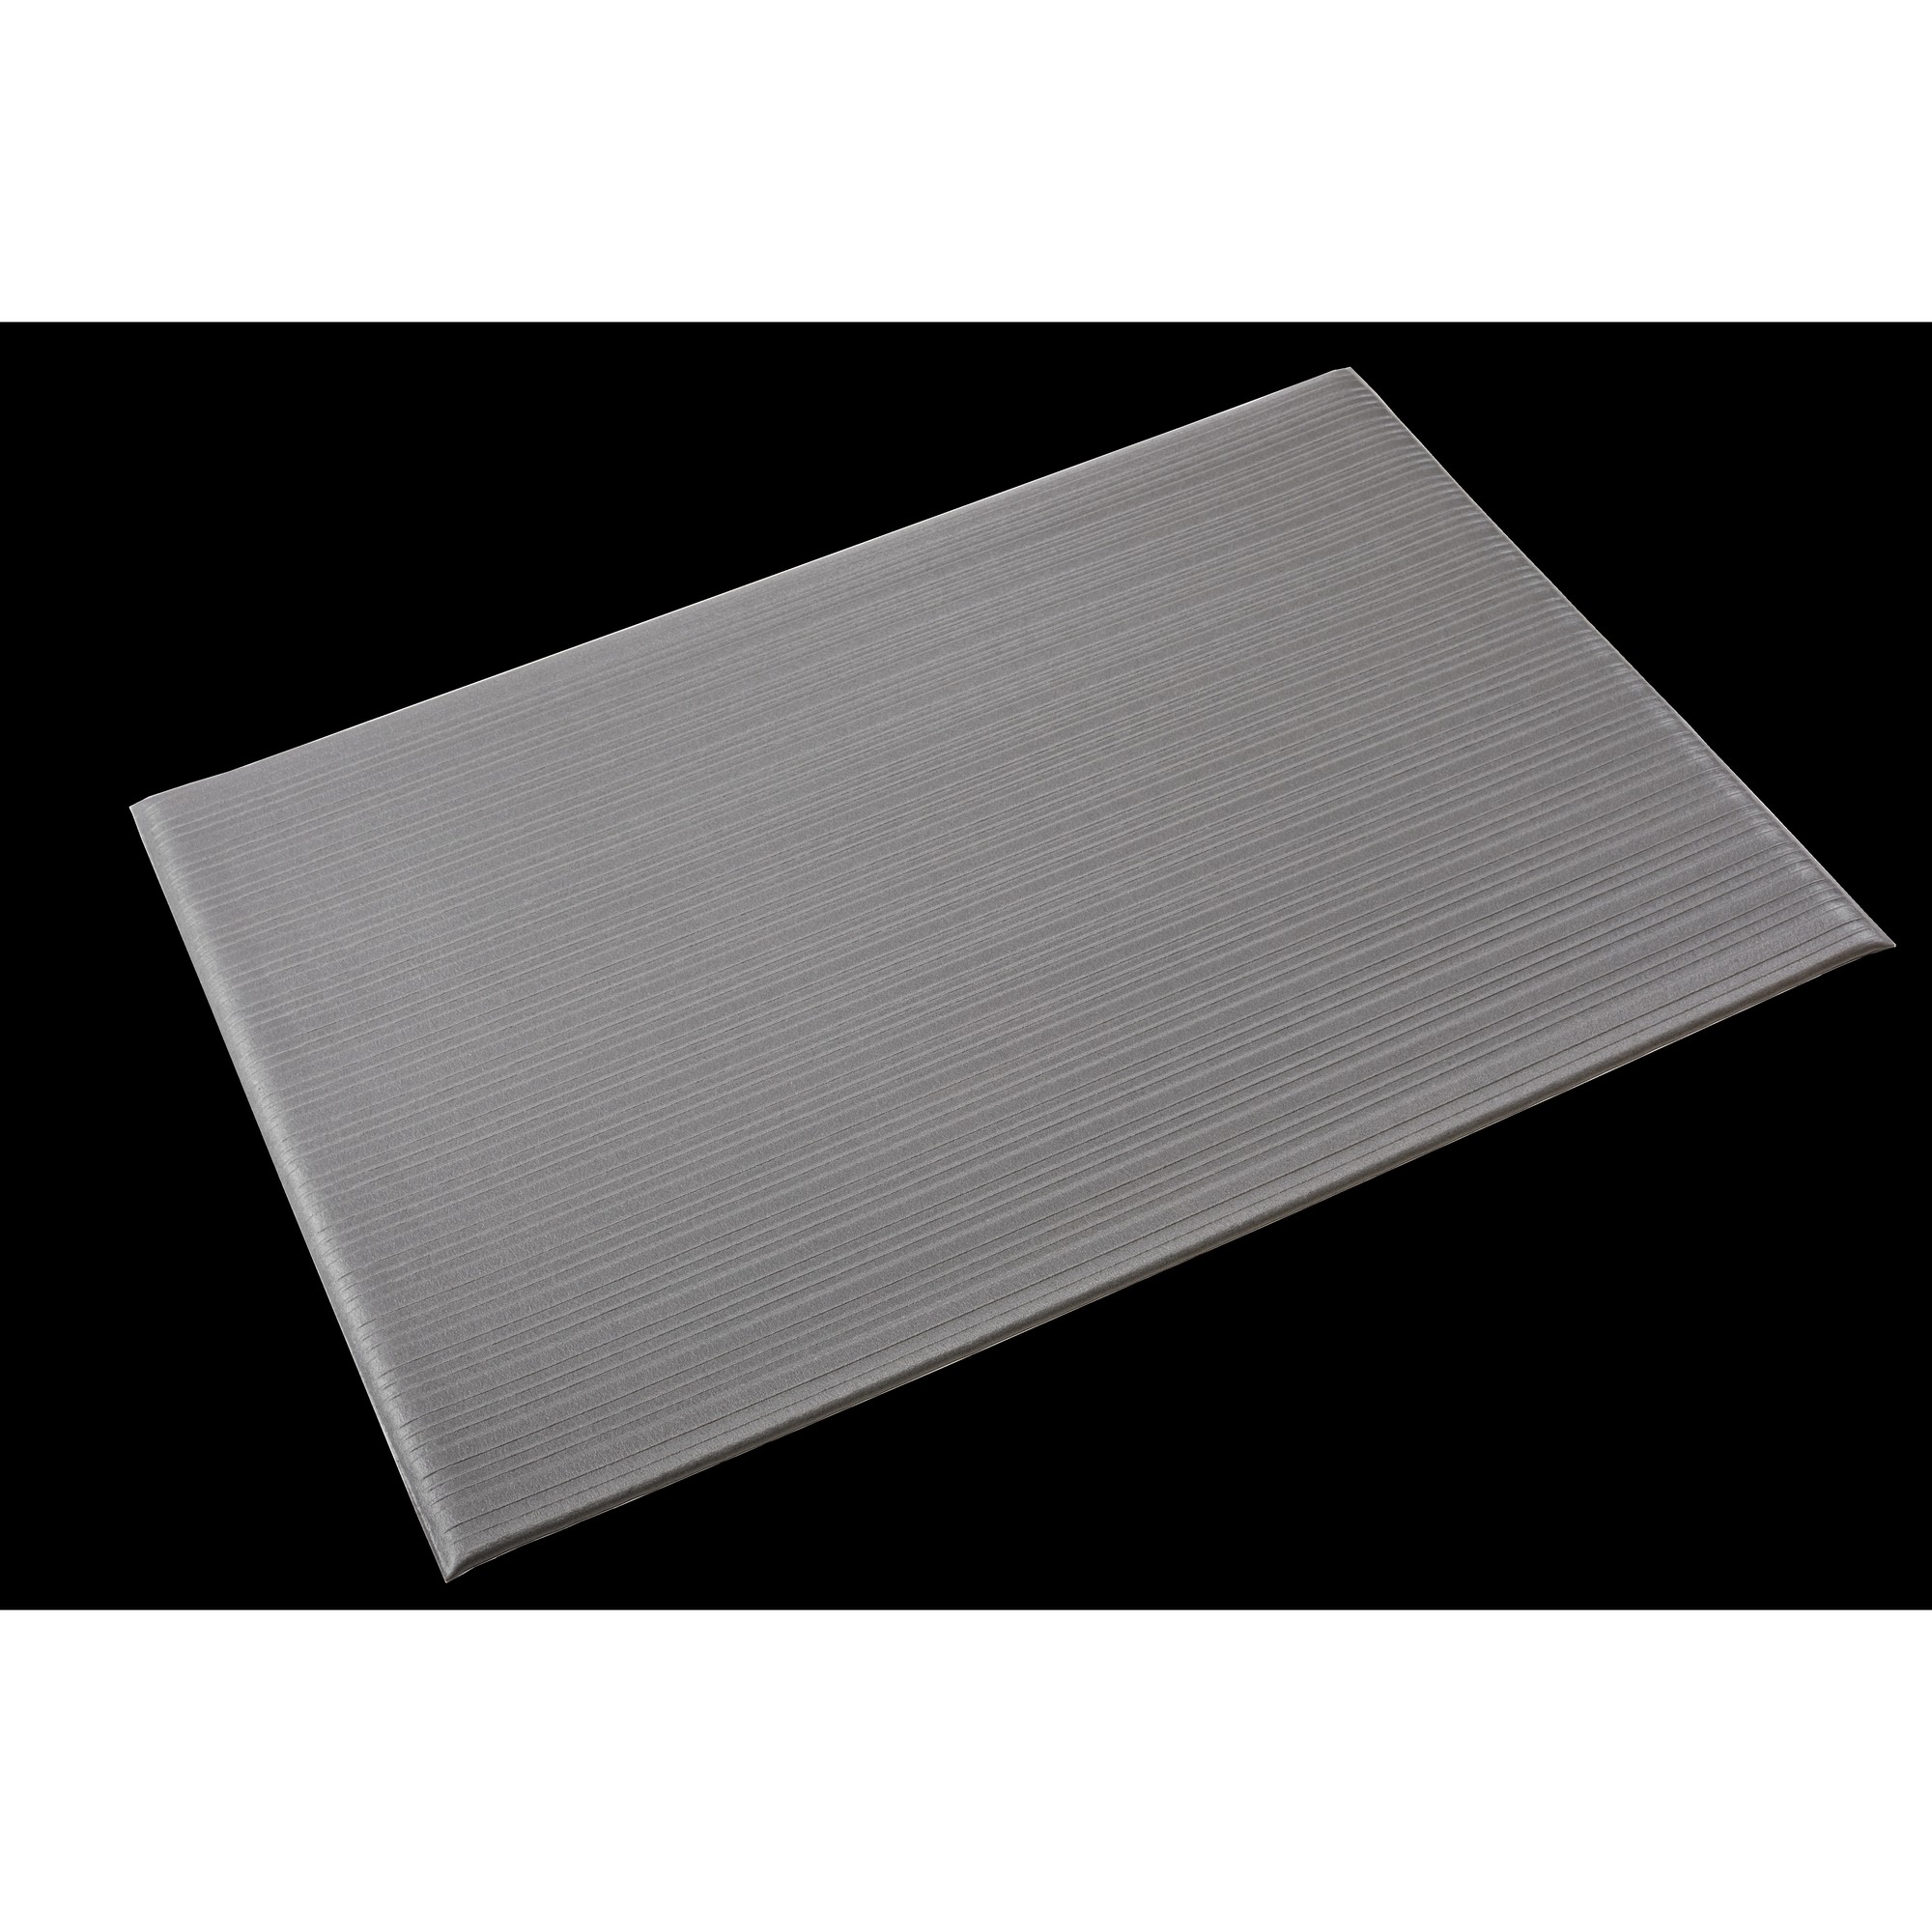 Crown Matting Technologies, Tuff-Spun 3/8 Rib-Surface 3ft.x12ft. Gray, Width 36 in, Length 144 in, Thickness 3/8 in, Model FL 3612GY